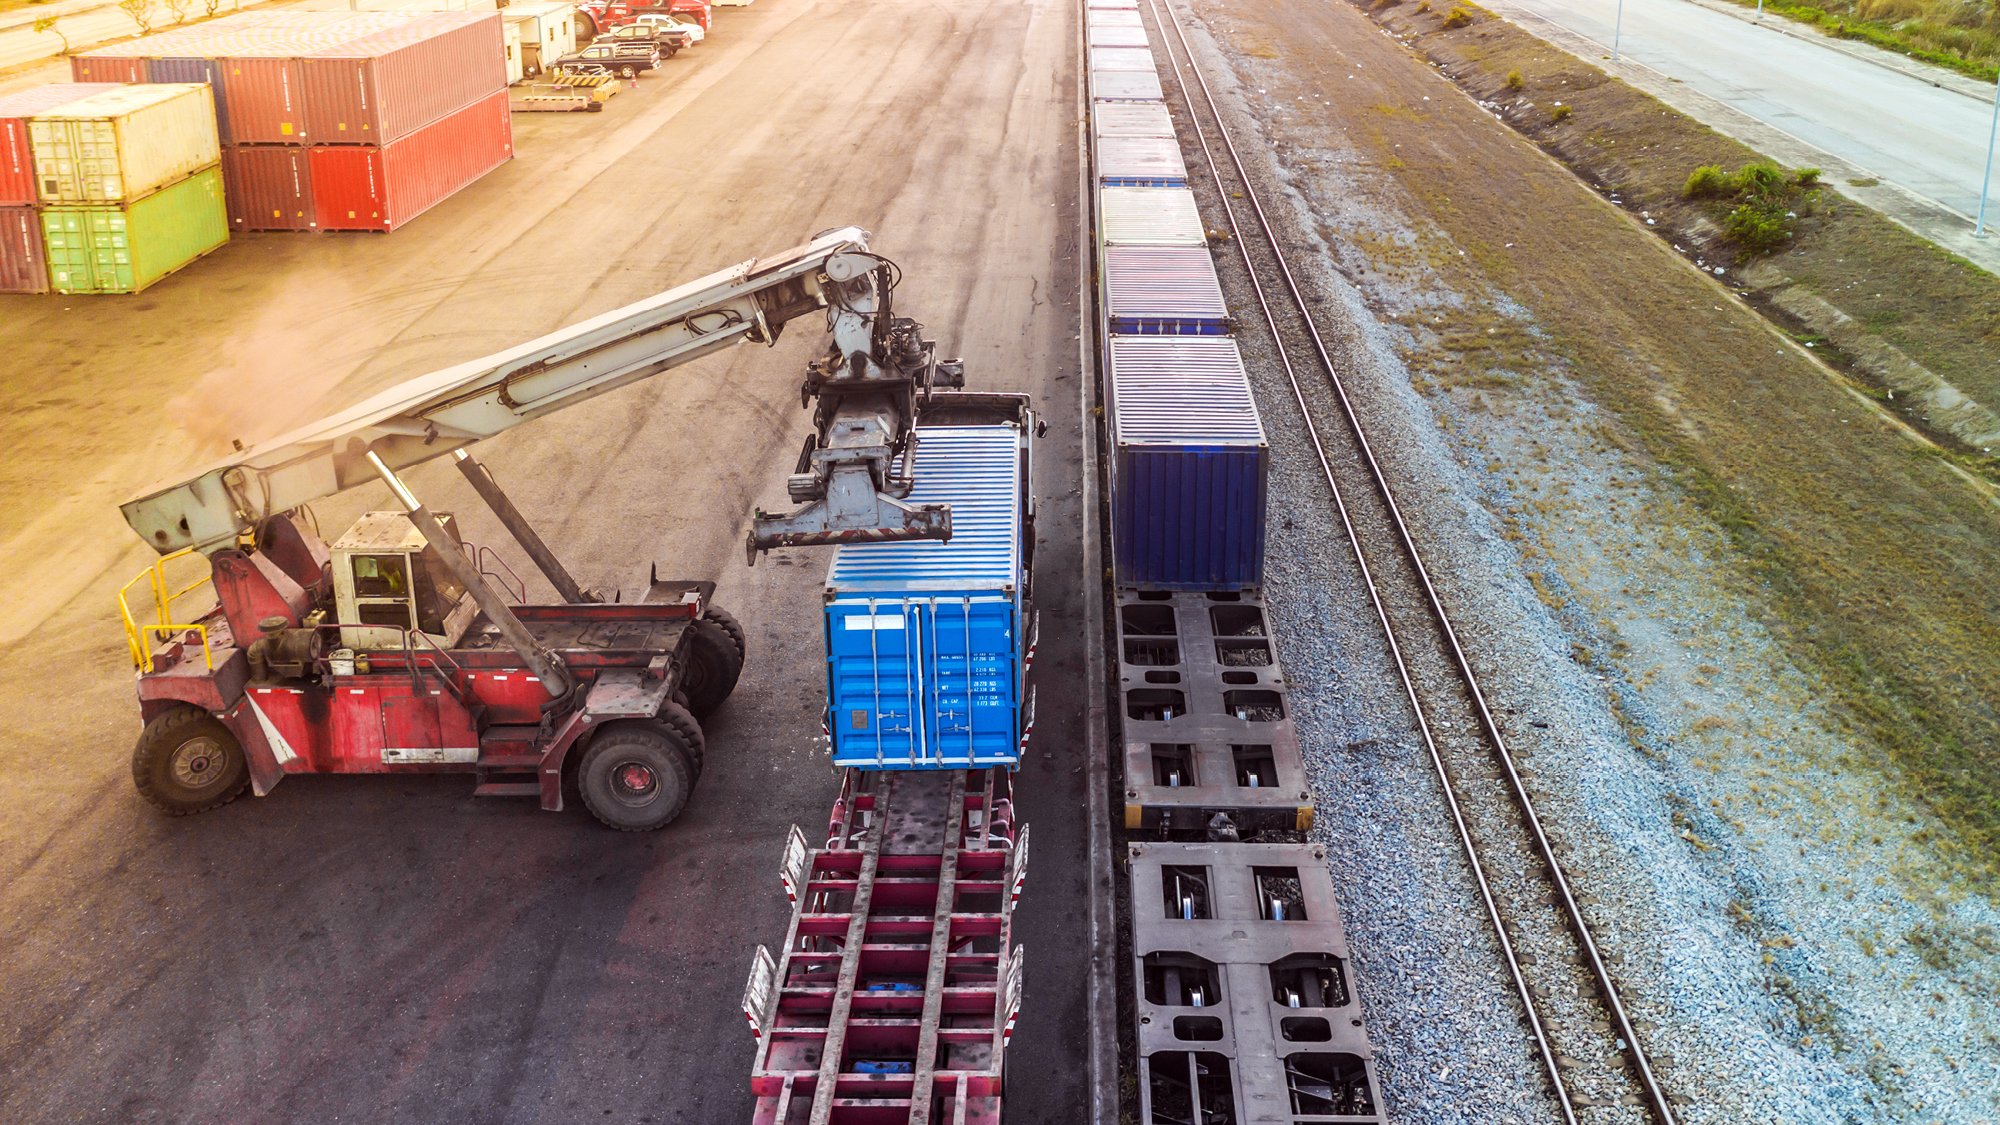 Forklift lifting shipping container onto a train for rail freight